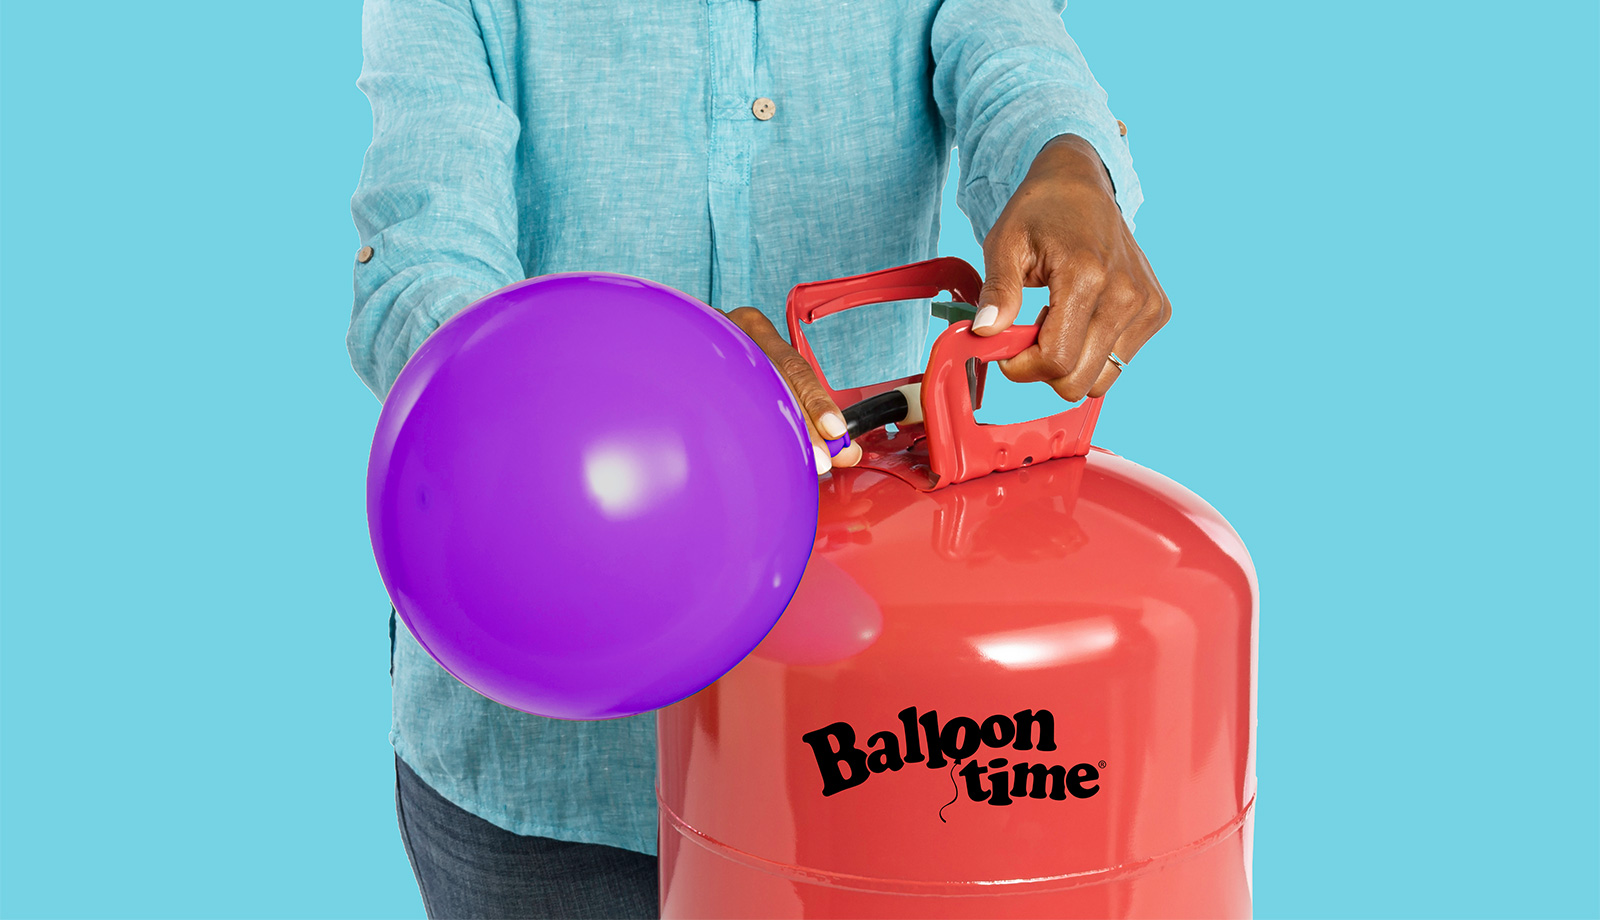 Helium Tank for Balloons